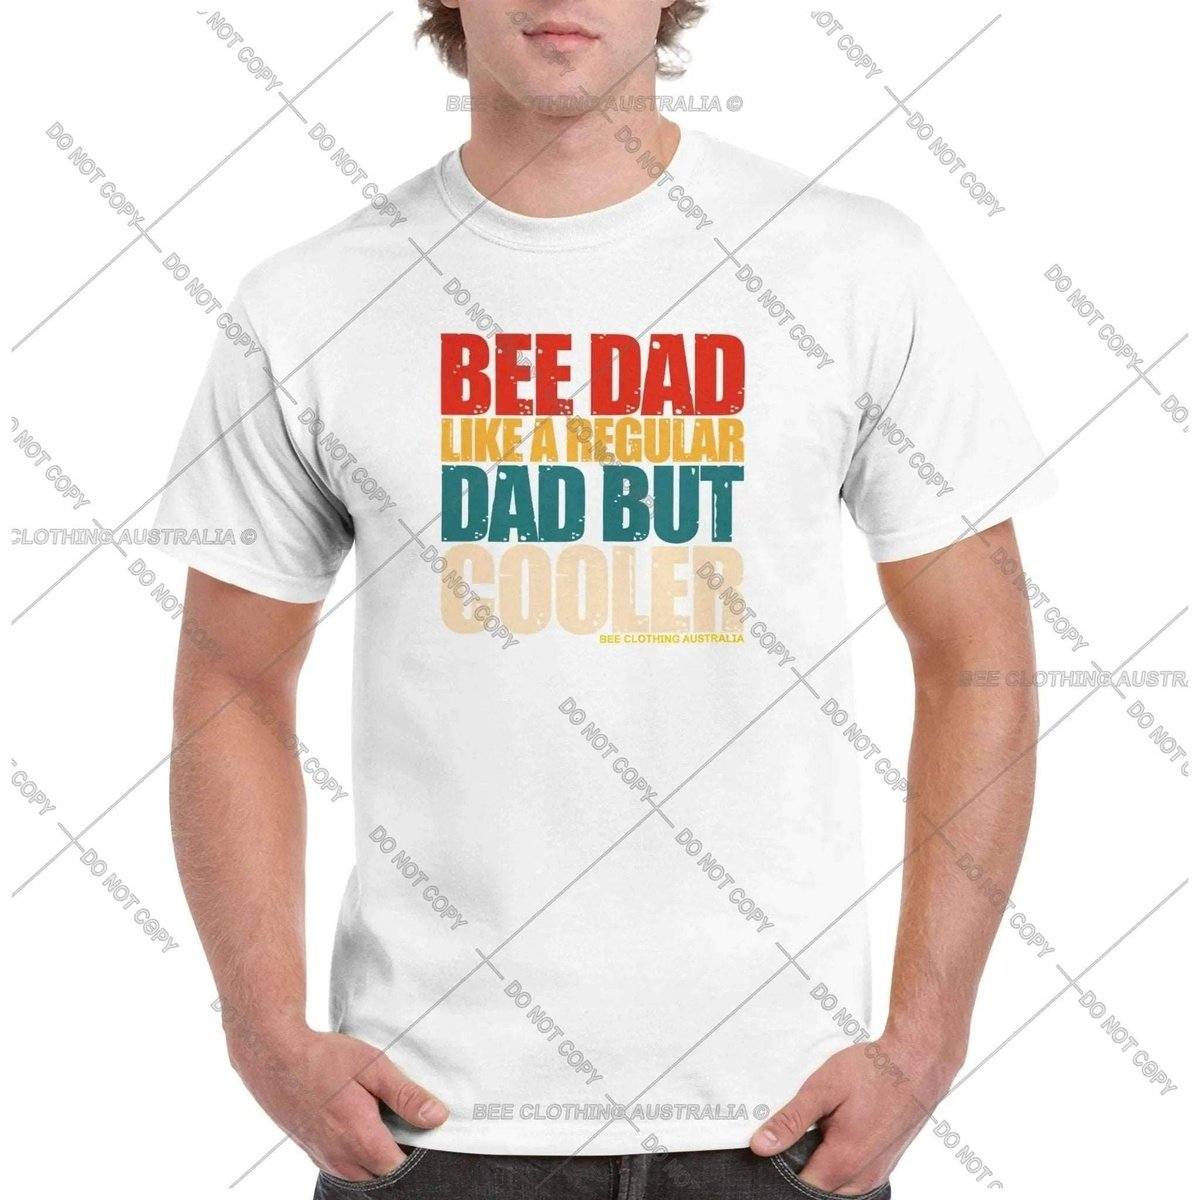 Bee Dad But Cooler VintageT-Shirt Adults T-Shirts Unisex White / S BC Australia